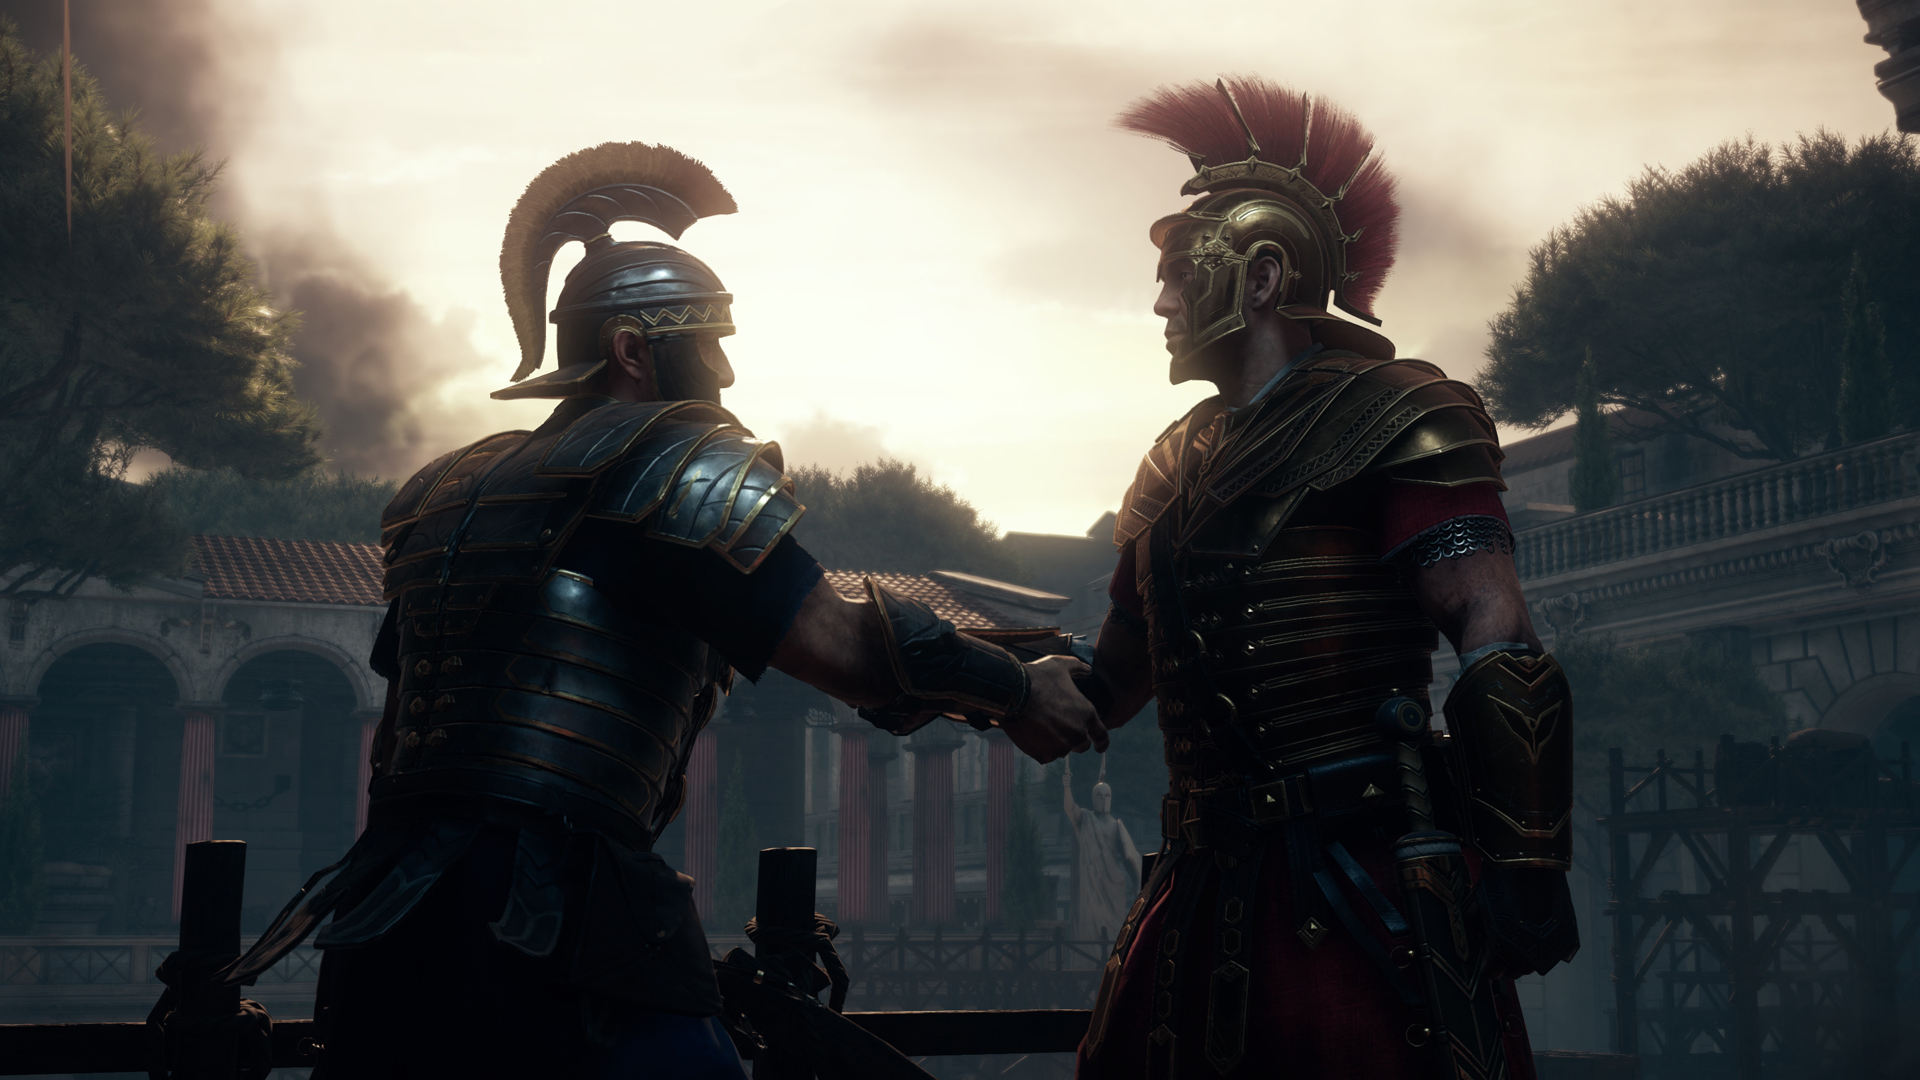 Ryse: Son of Rome is coming to PC